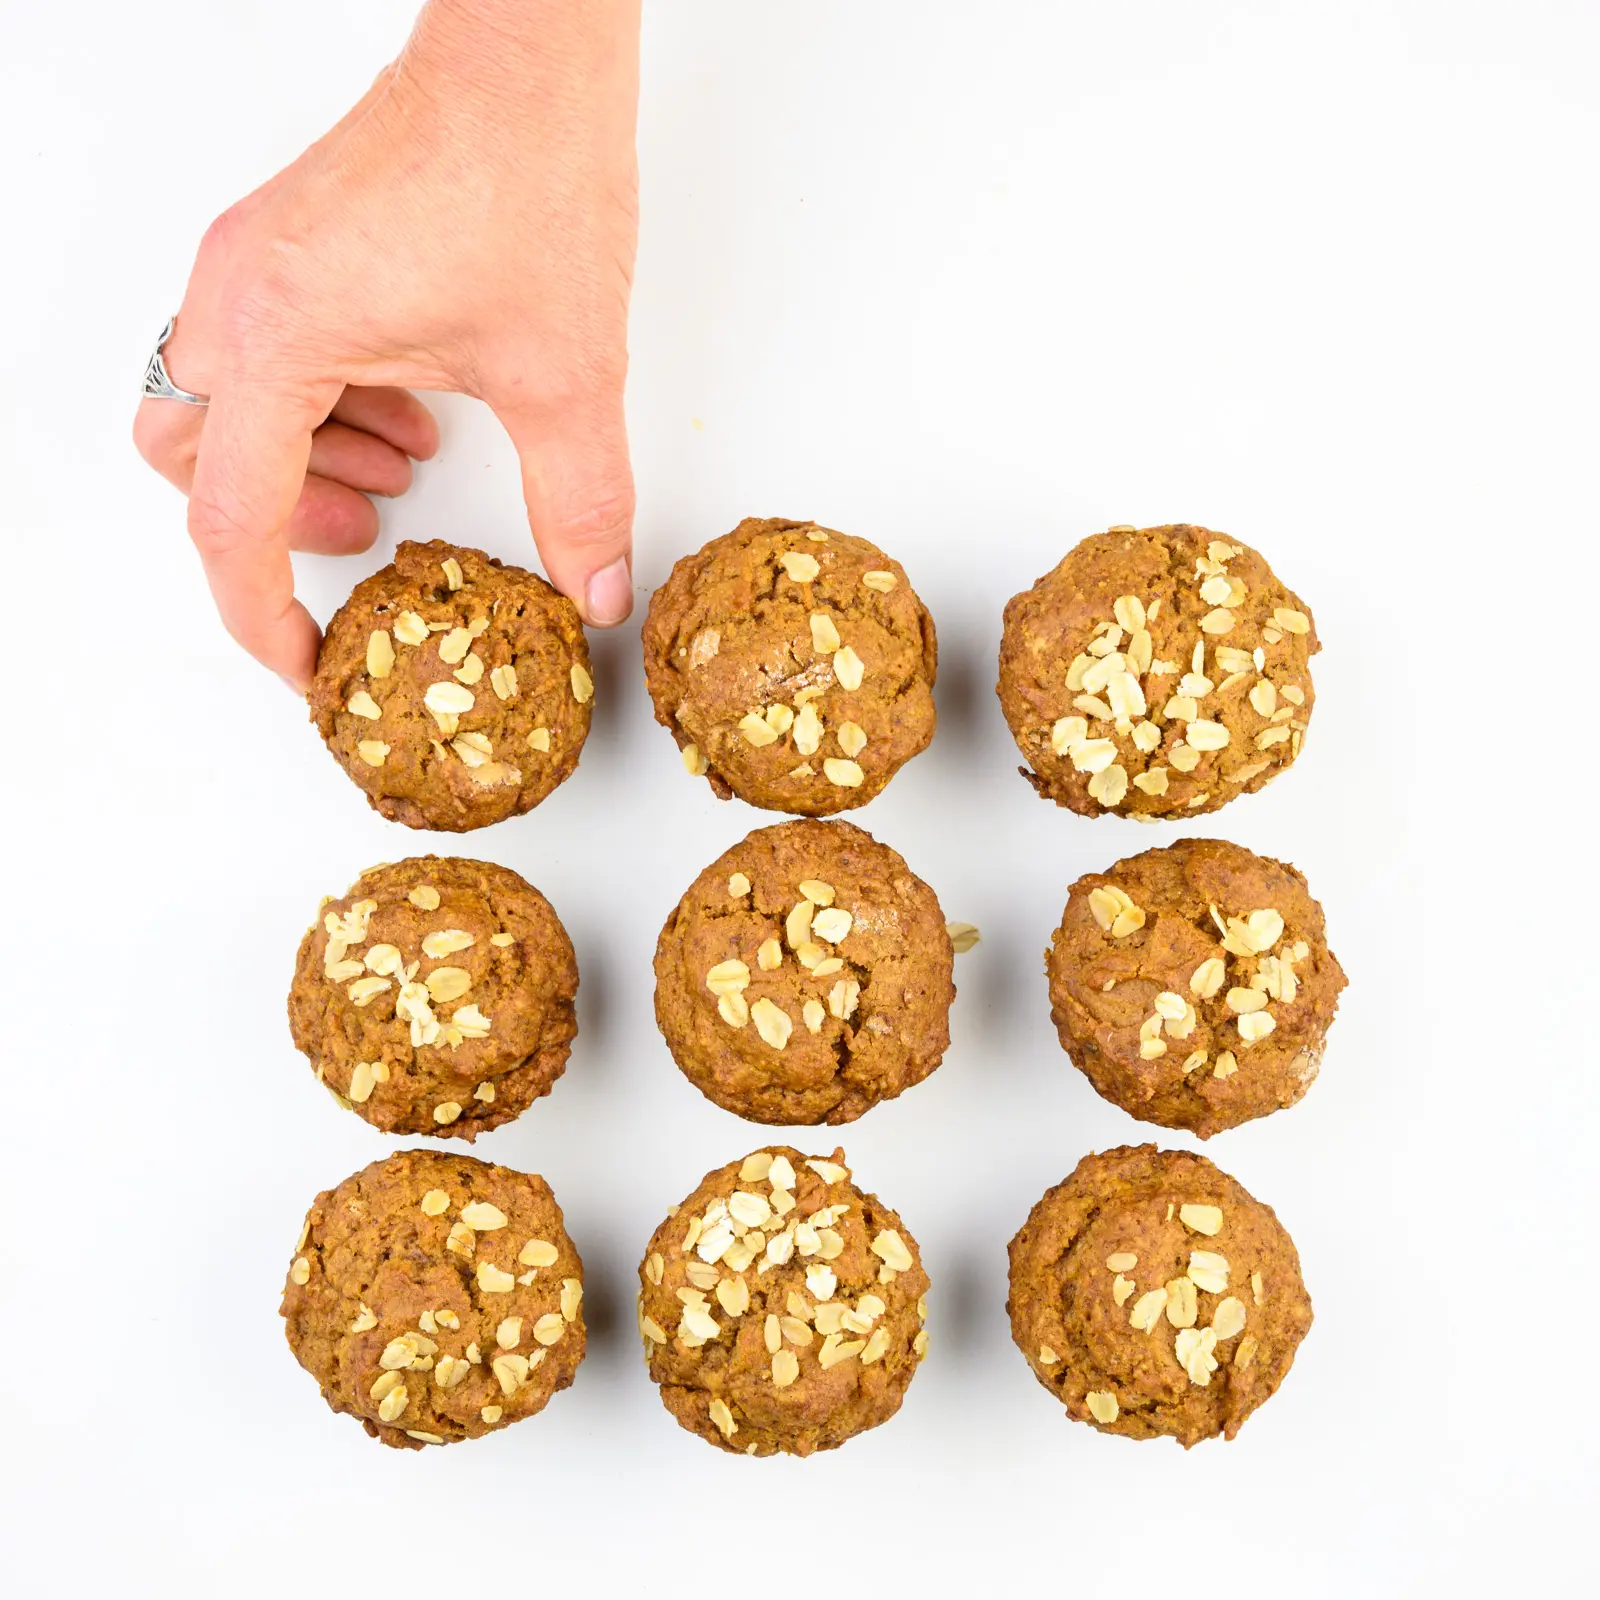 A hand reaches into a group of muffins to grab one.